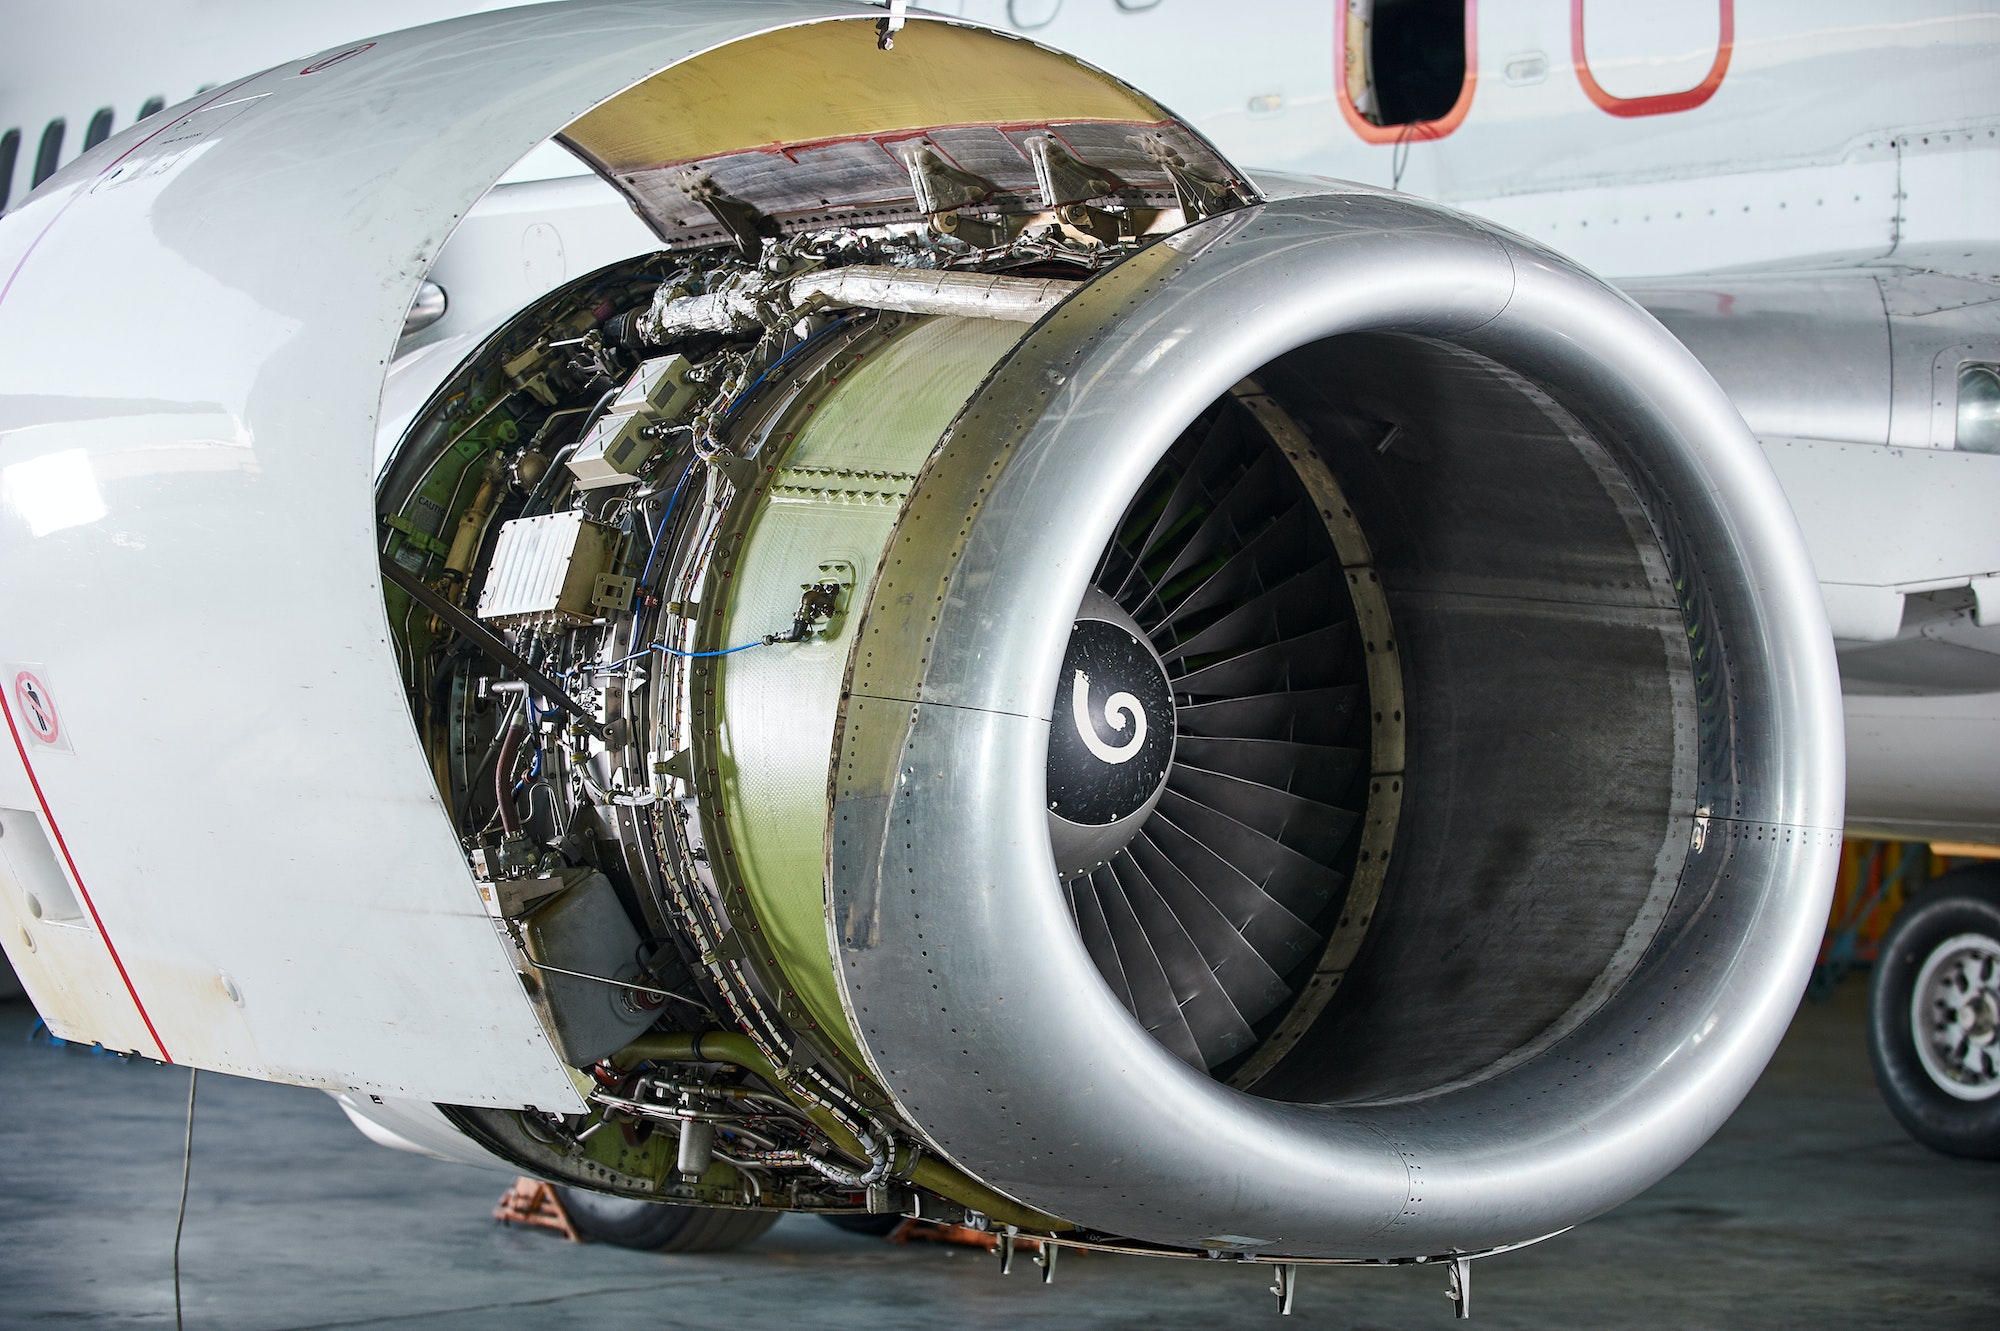 aircraft engine servicing - opened panels of a large engine of parked aircraft.